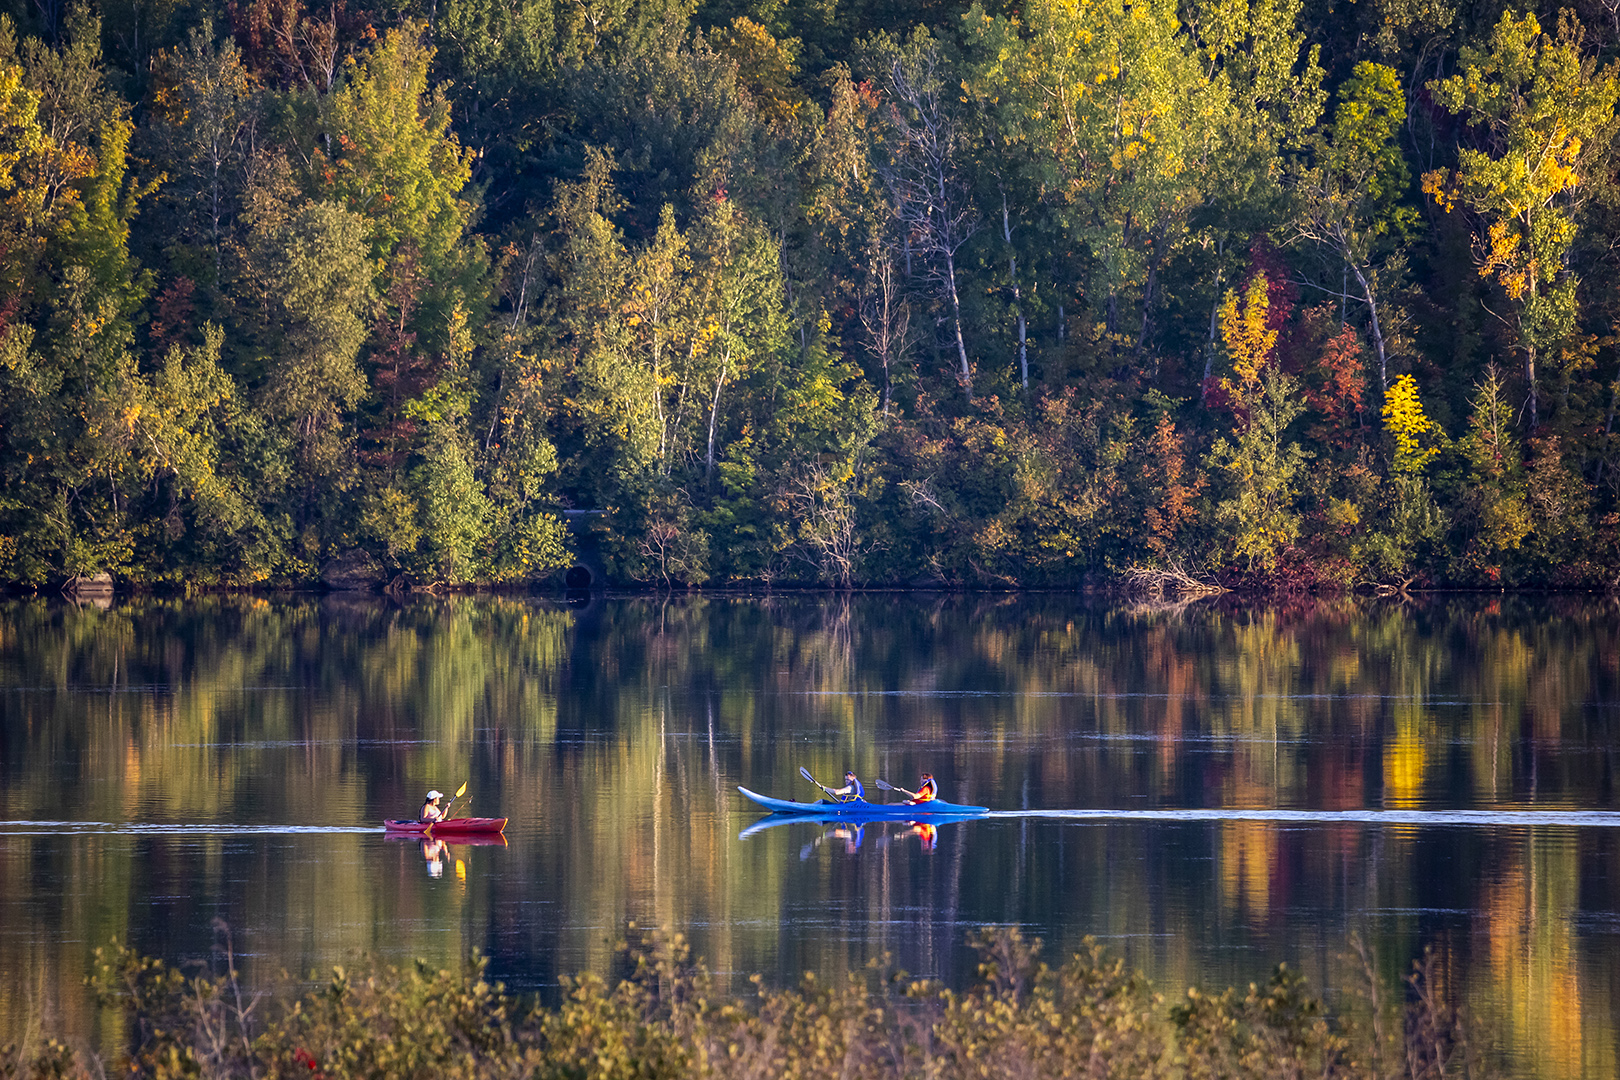 Canoeing in the upper reaches of Lac Boivin. Granby, Quebec, Canada (Asbjørn M Olsen, MNFFF/b 2023)